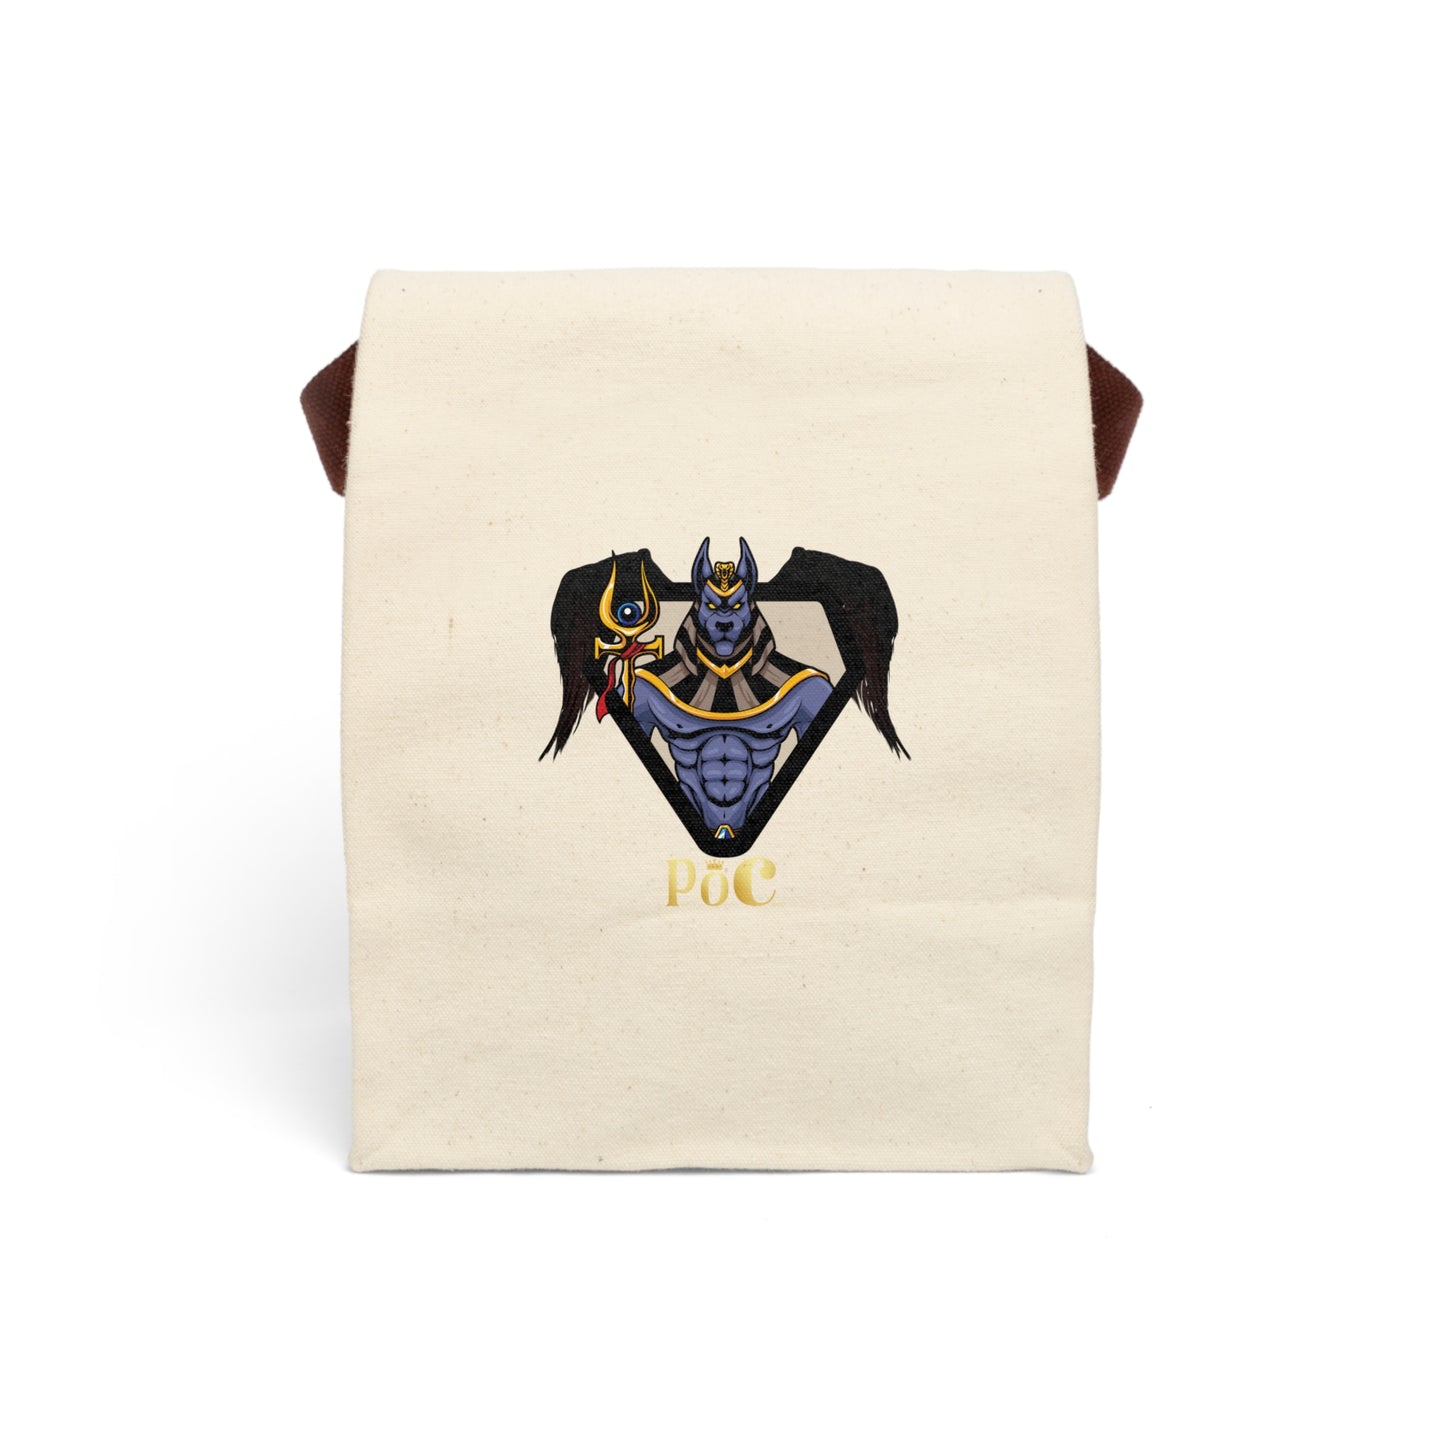 P.o.C Canvas Lunch Bag